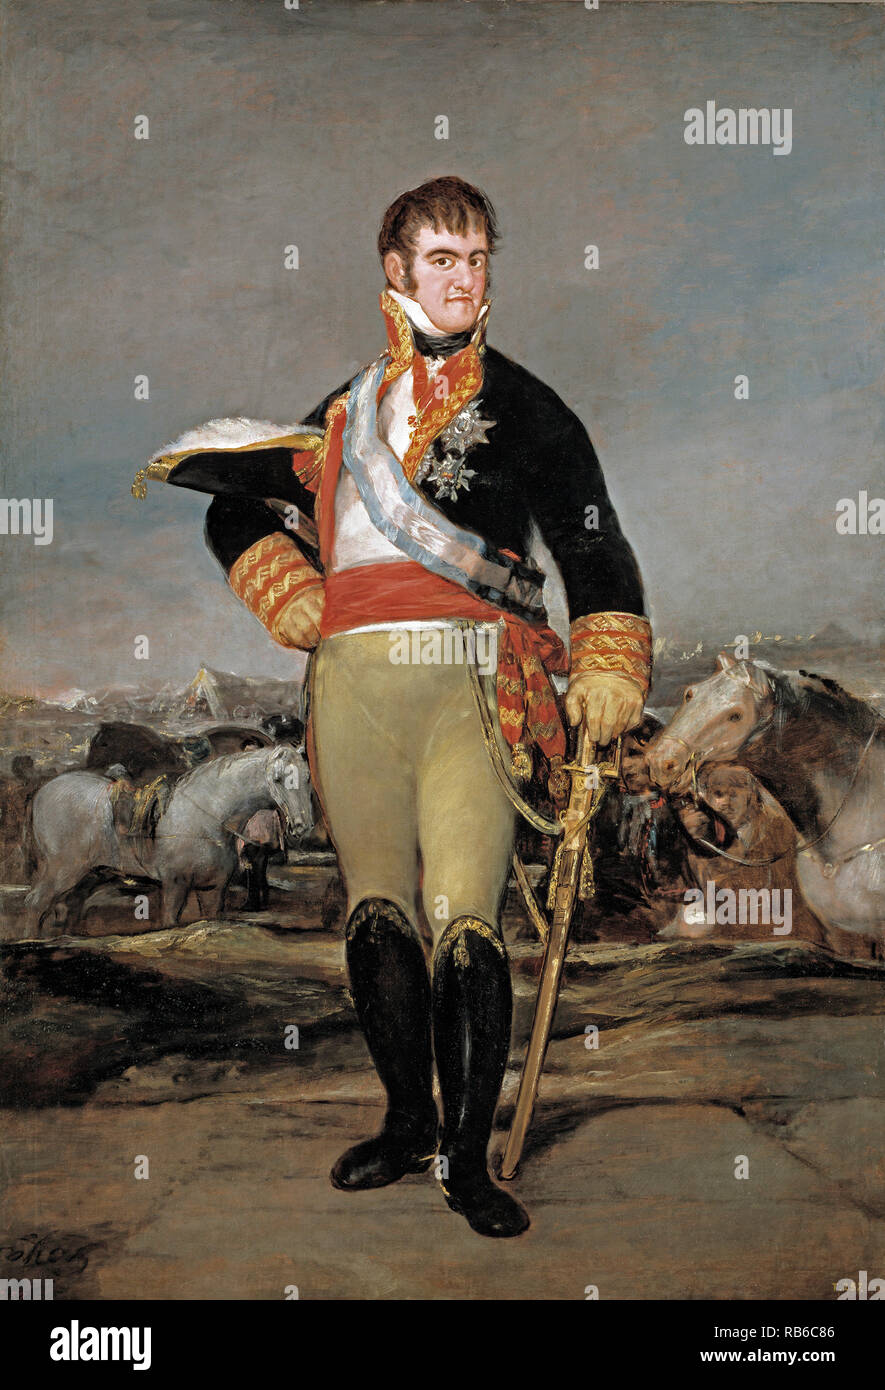 Ferdinand VII of Spain, King Ferdinand VII (1784 – 1833) twice King of Spain: in 1808 and again from 1813 to his death. Stock Photo